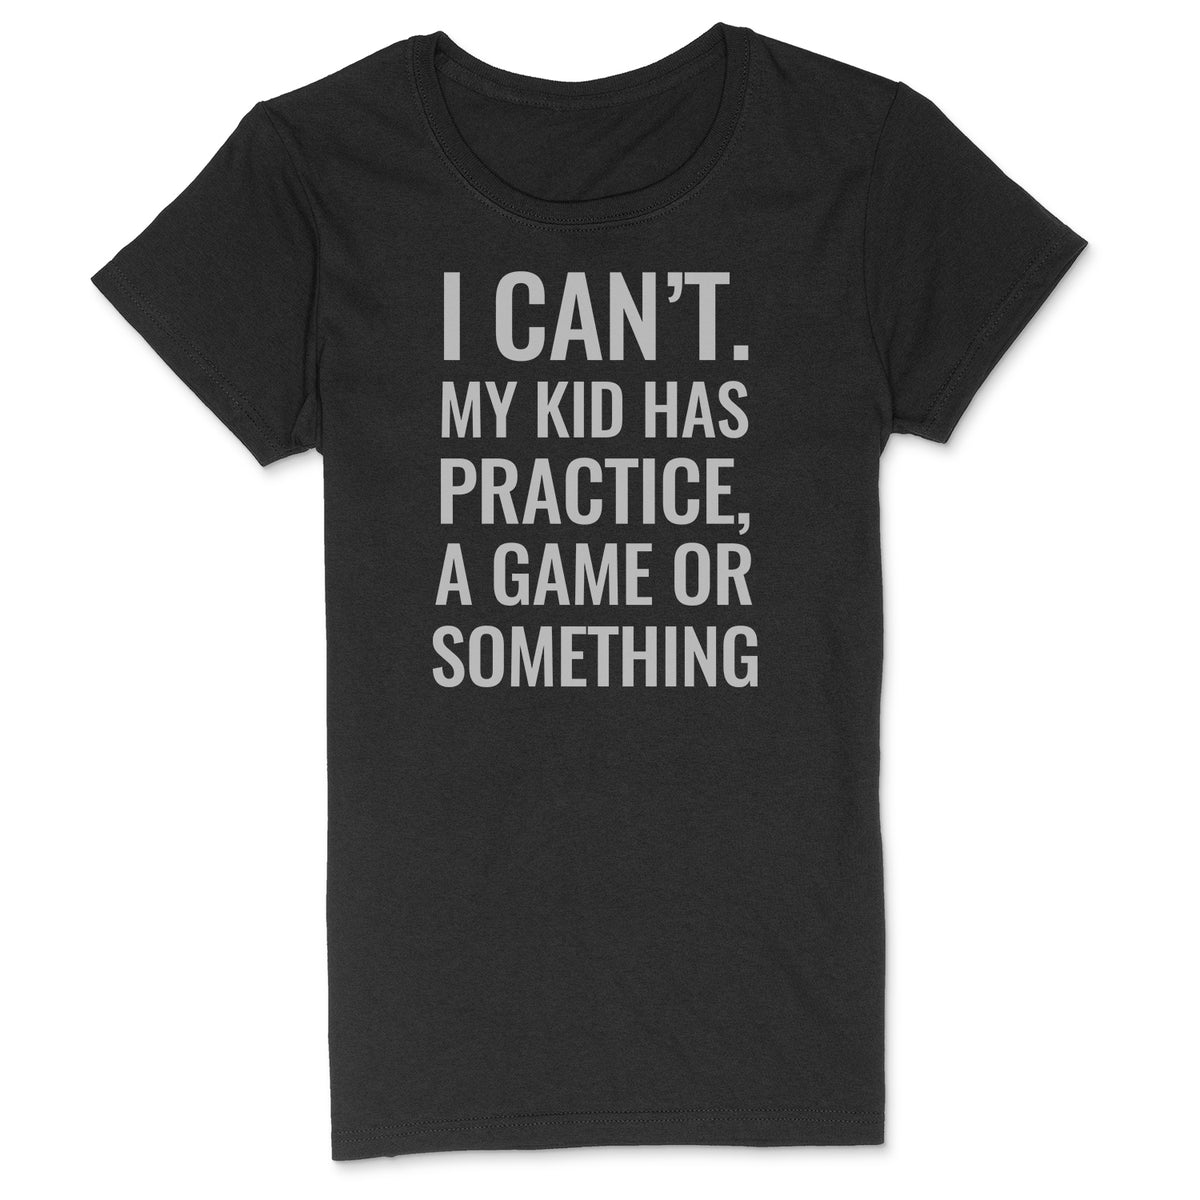 "I Can't" Premium Midweight Ringspun Cotton T-Shirt - Mens/Womens Fits